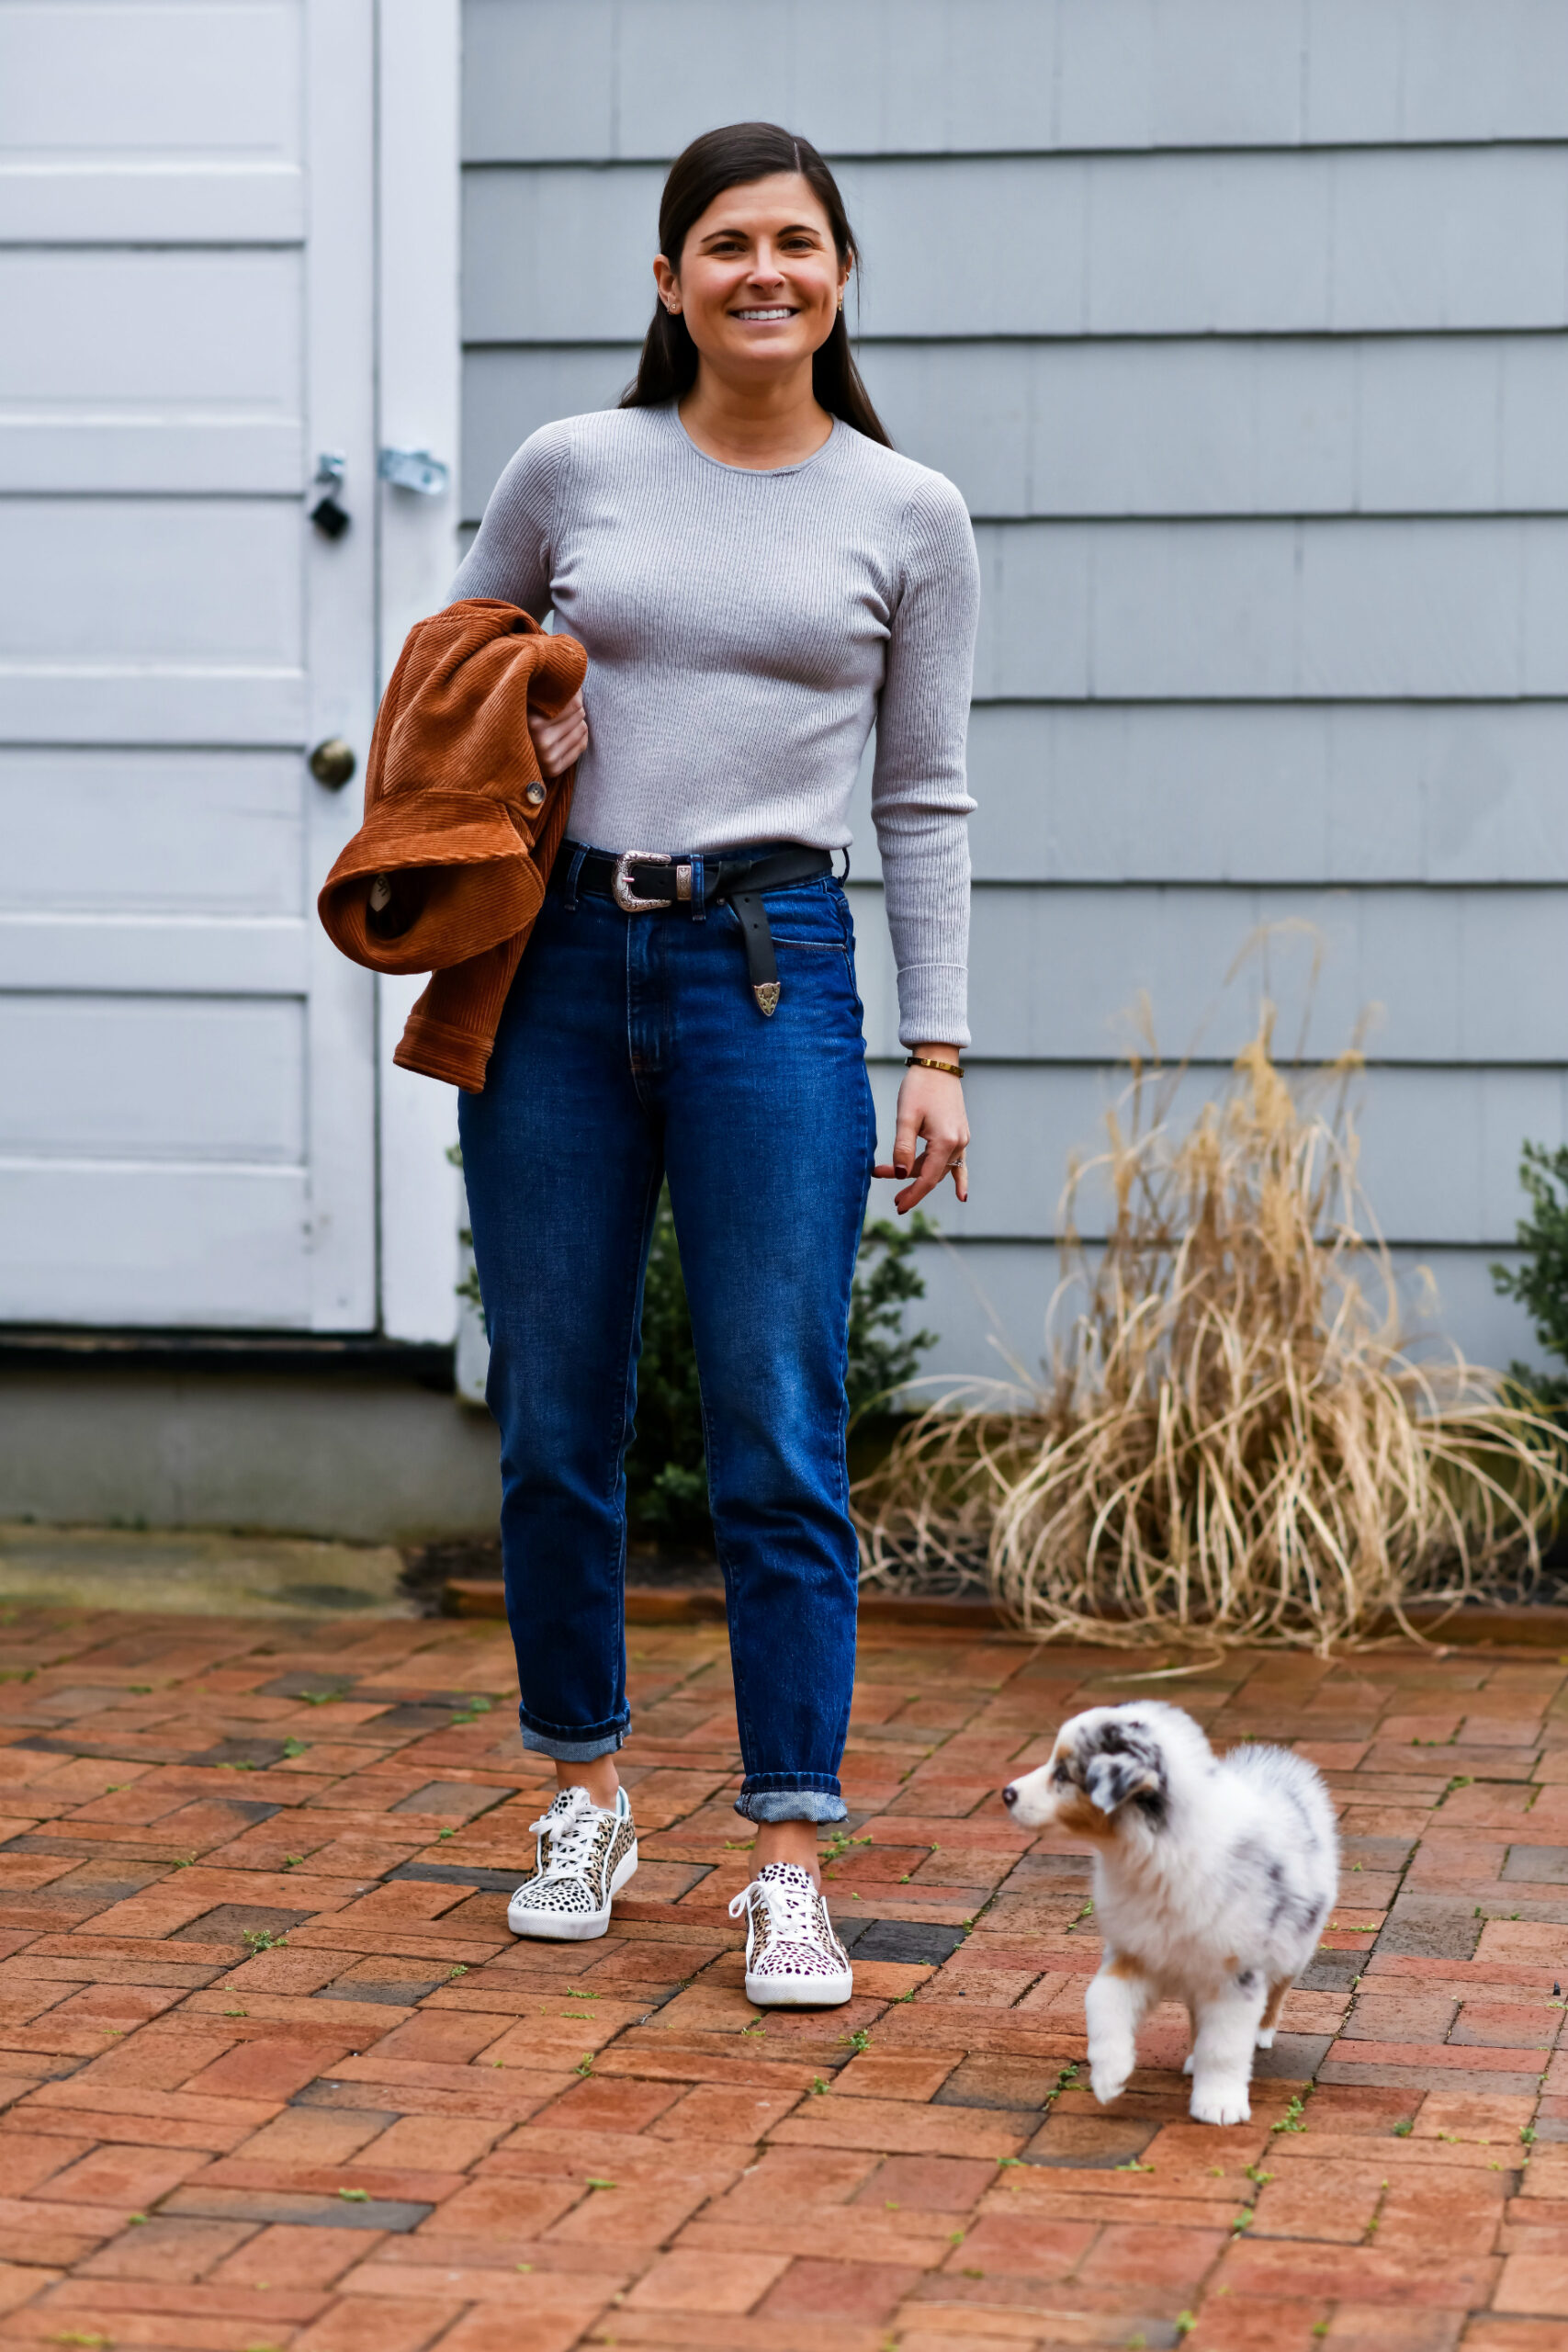 Mott & Bow The Mom "Henry" Jean, Mom Jean Outfit, Mott & Bow Light Ribbed Cashmere Sweater, Ann Taylor Natalia Spotted Sneakers, Tilden of To Be Bright 